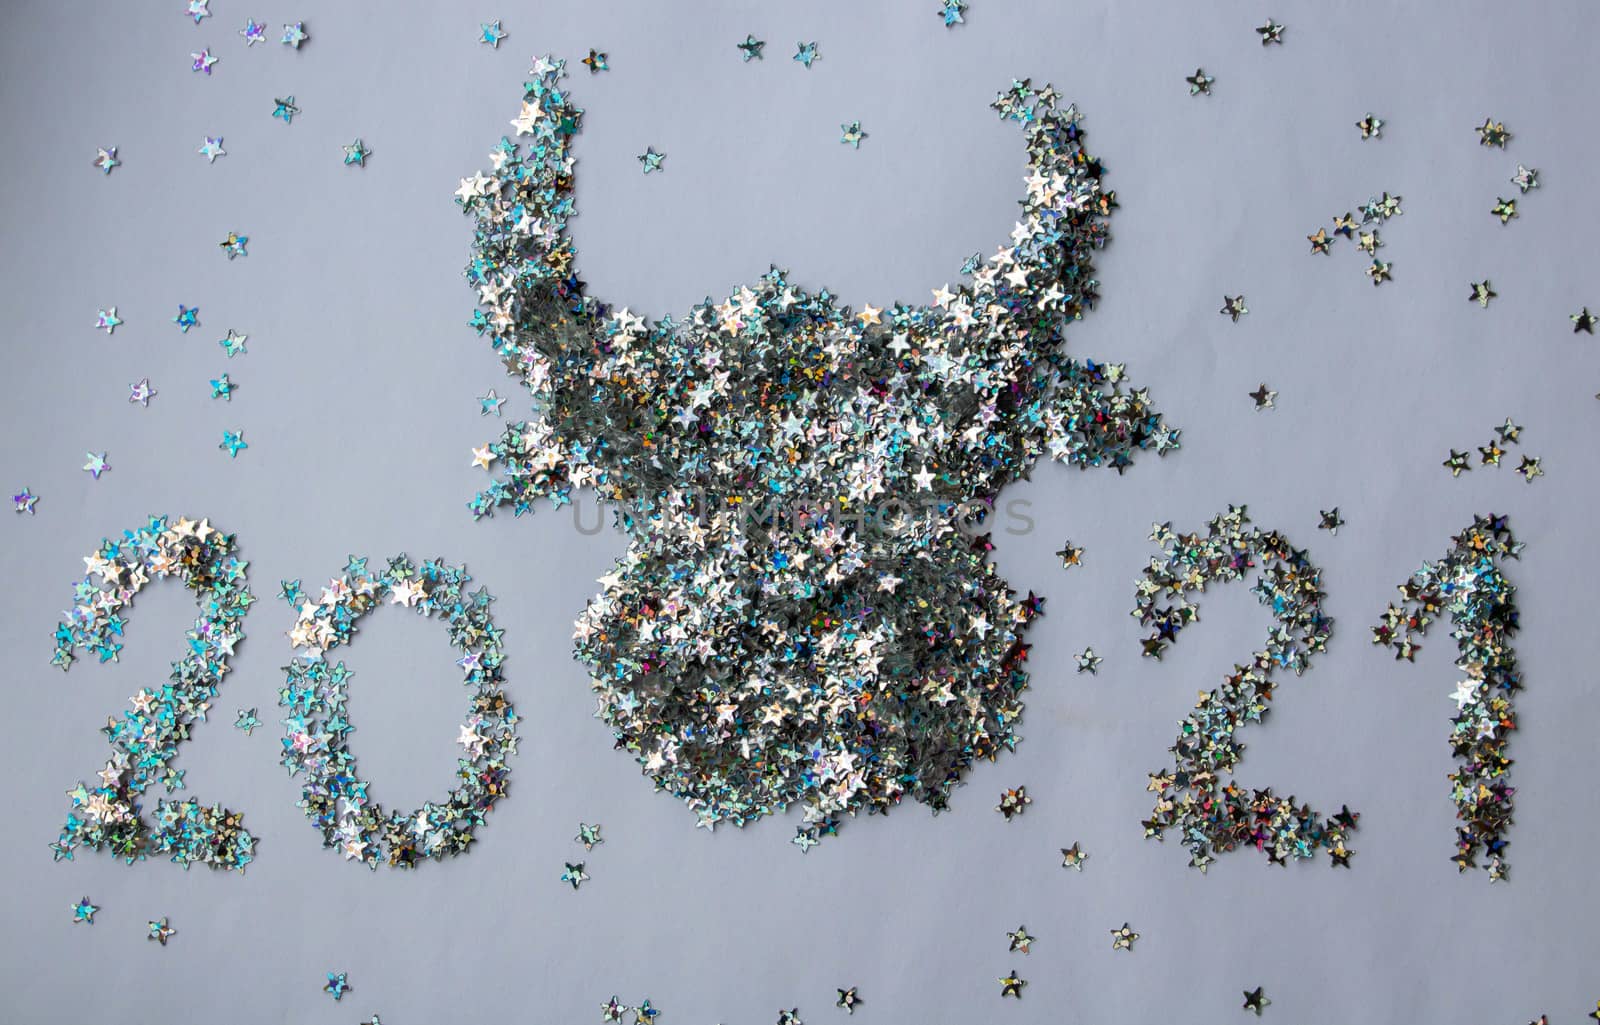 The bull and the numbers 2021 are made of silver glittering stars on a white background. decorations for a happy Christmas happy New year background design